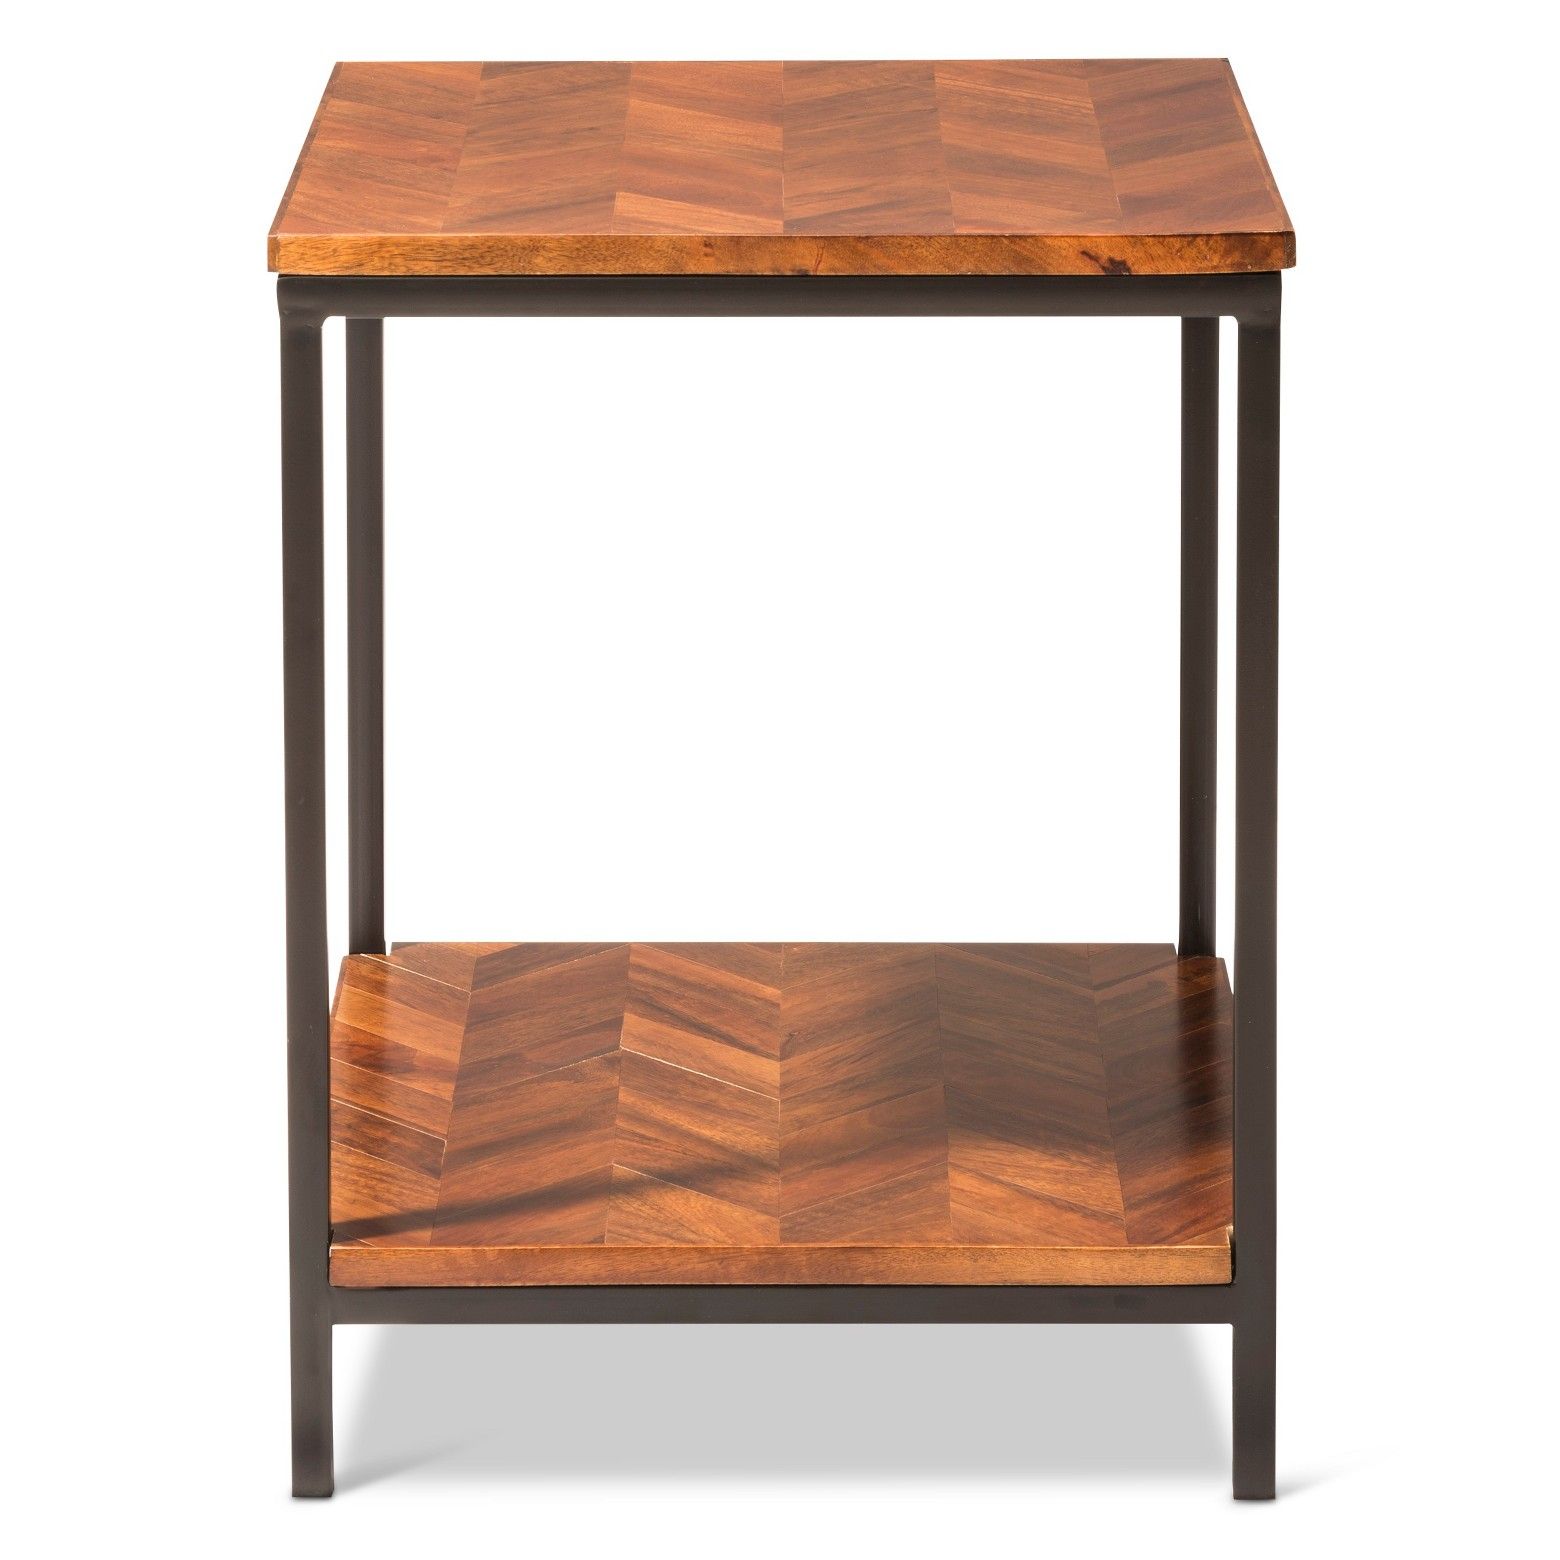 threshold preston end table parquet accent bull industrial chic stylebrbullnbspwalnut stained wood top with black metal basebrbull sturdy designbrbull integrated shelf for skinny